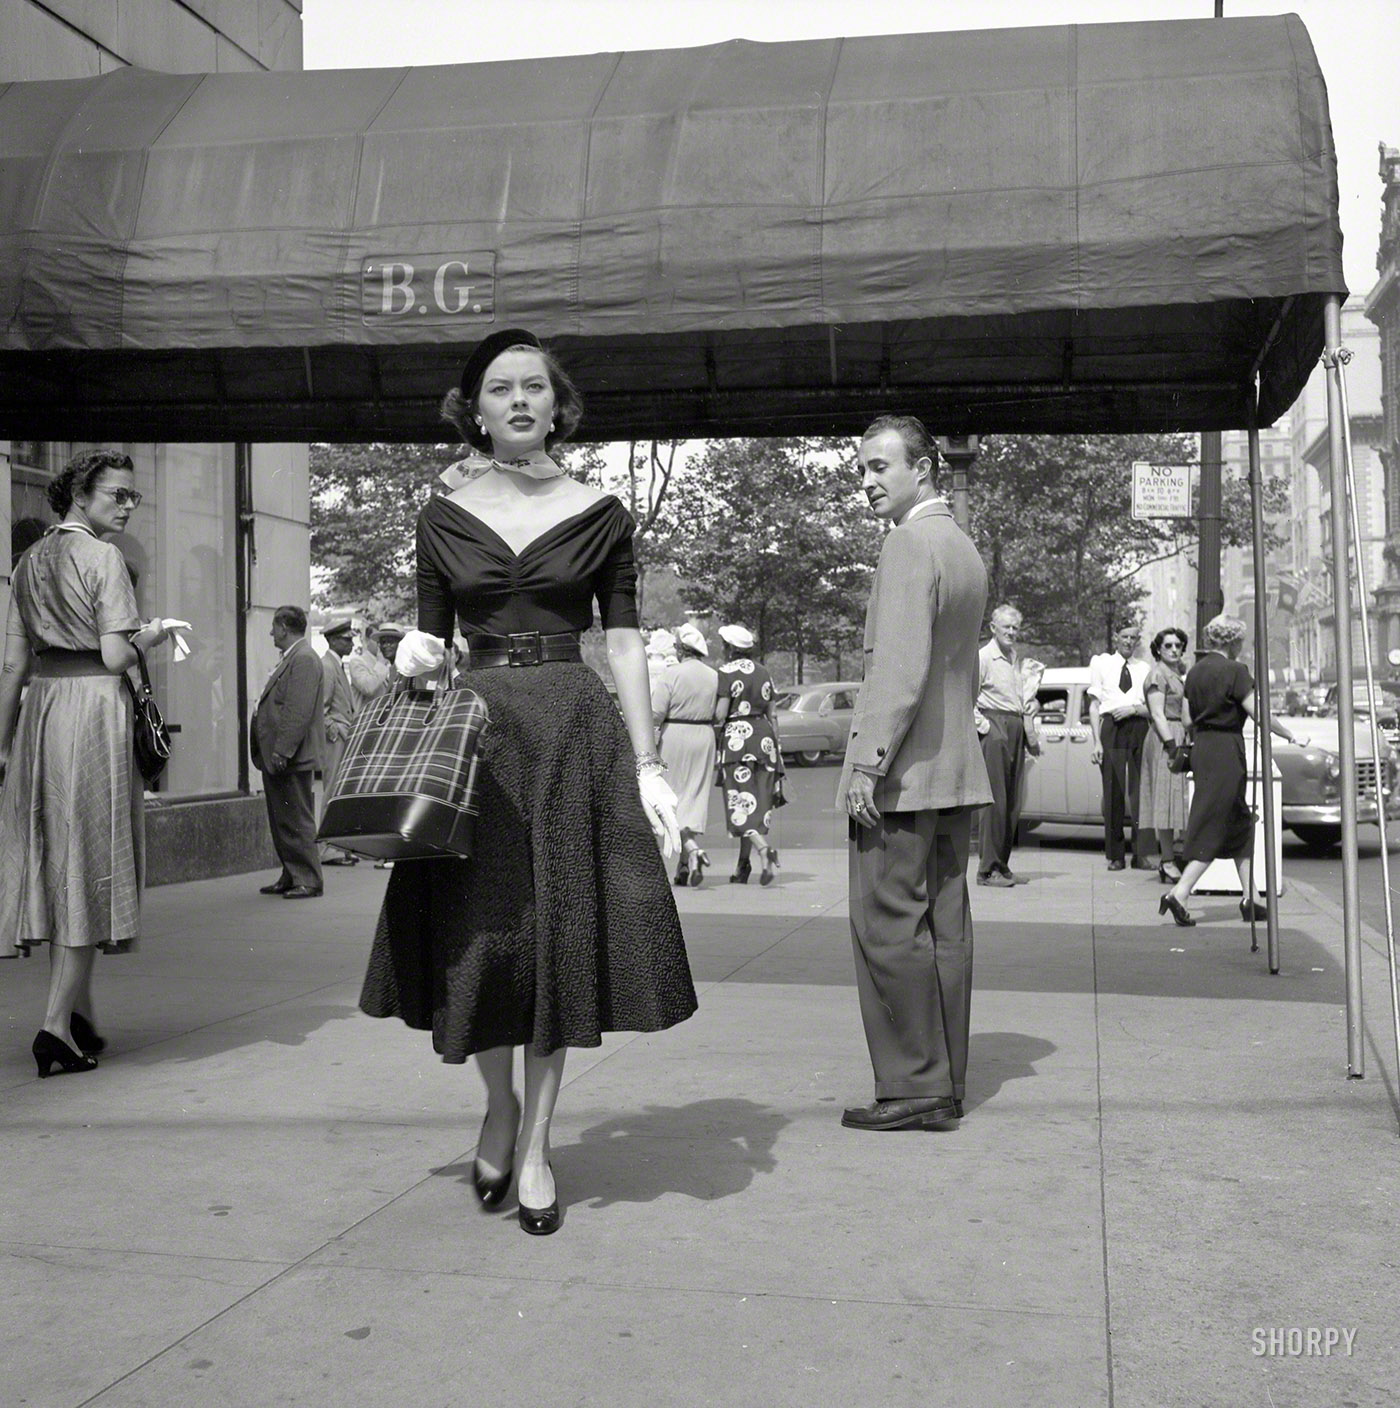 September 1952. New York. "Photos show people looking at fashion model Doris Erwin as she walks down Fifth Avenue." Just passing Bergdorf Goodman. One of three dozen images snapped by Ralph Ginzburg for the Look magazine assignment "A Young Man's Fancy -- Model on the Street." View full size.